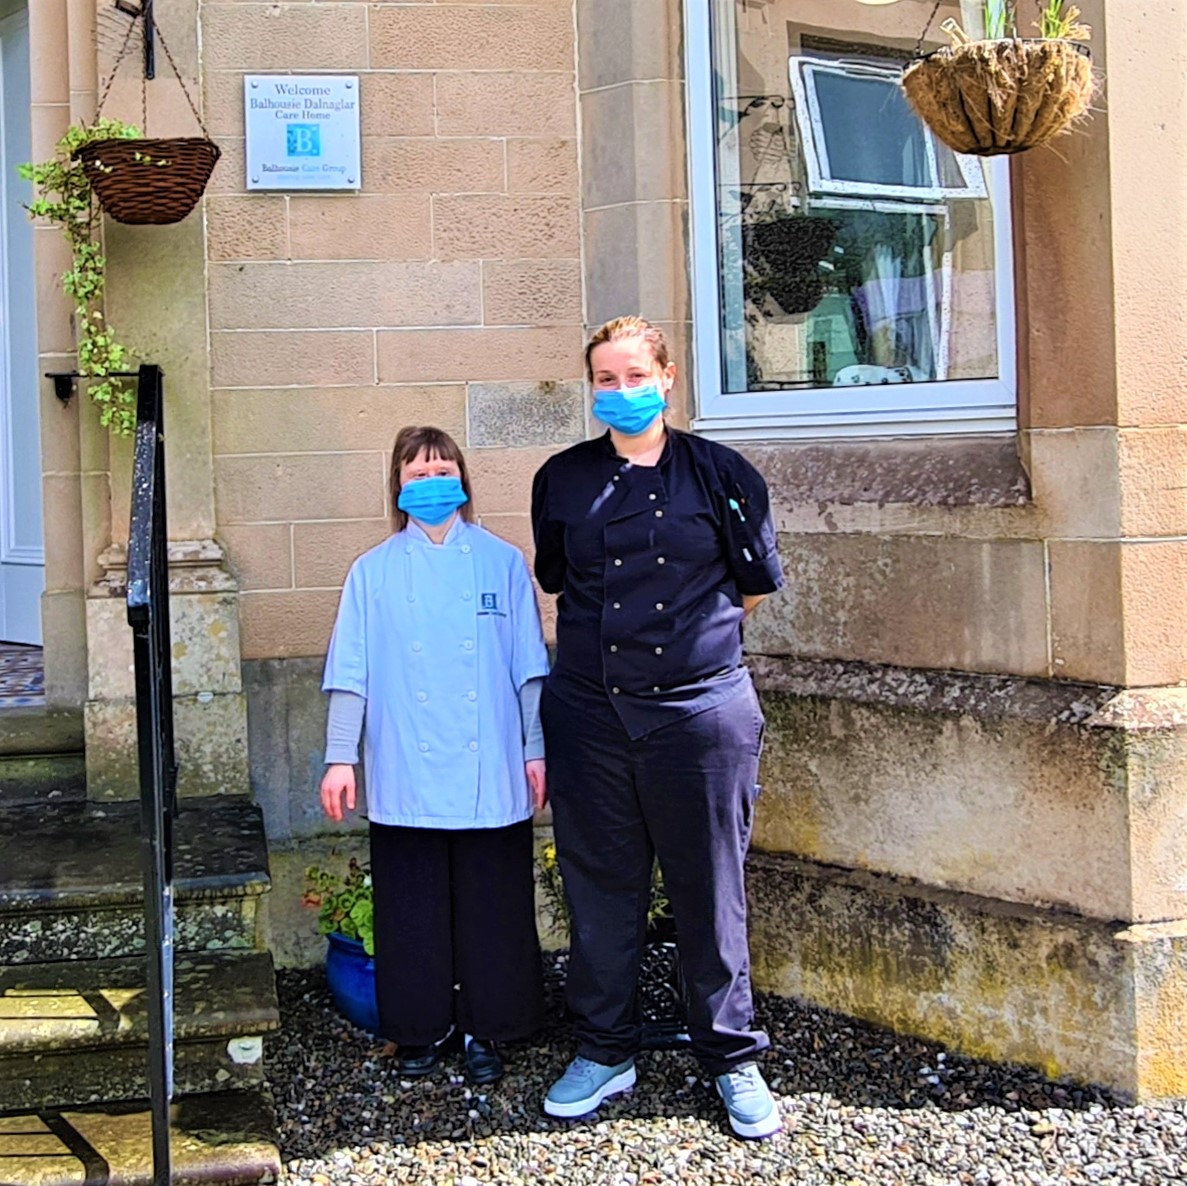 Dalnaglar - chef and assistant outside care home